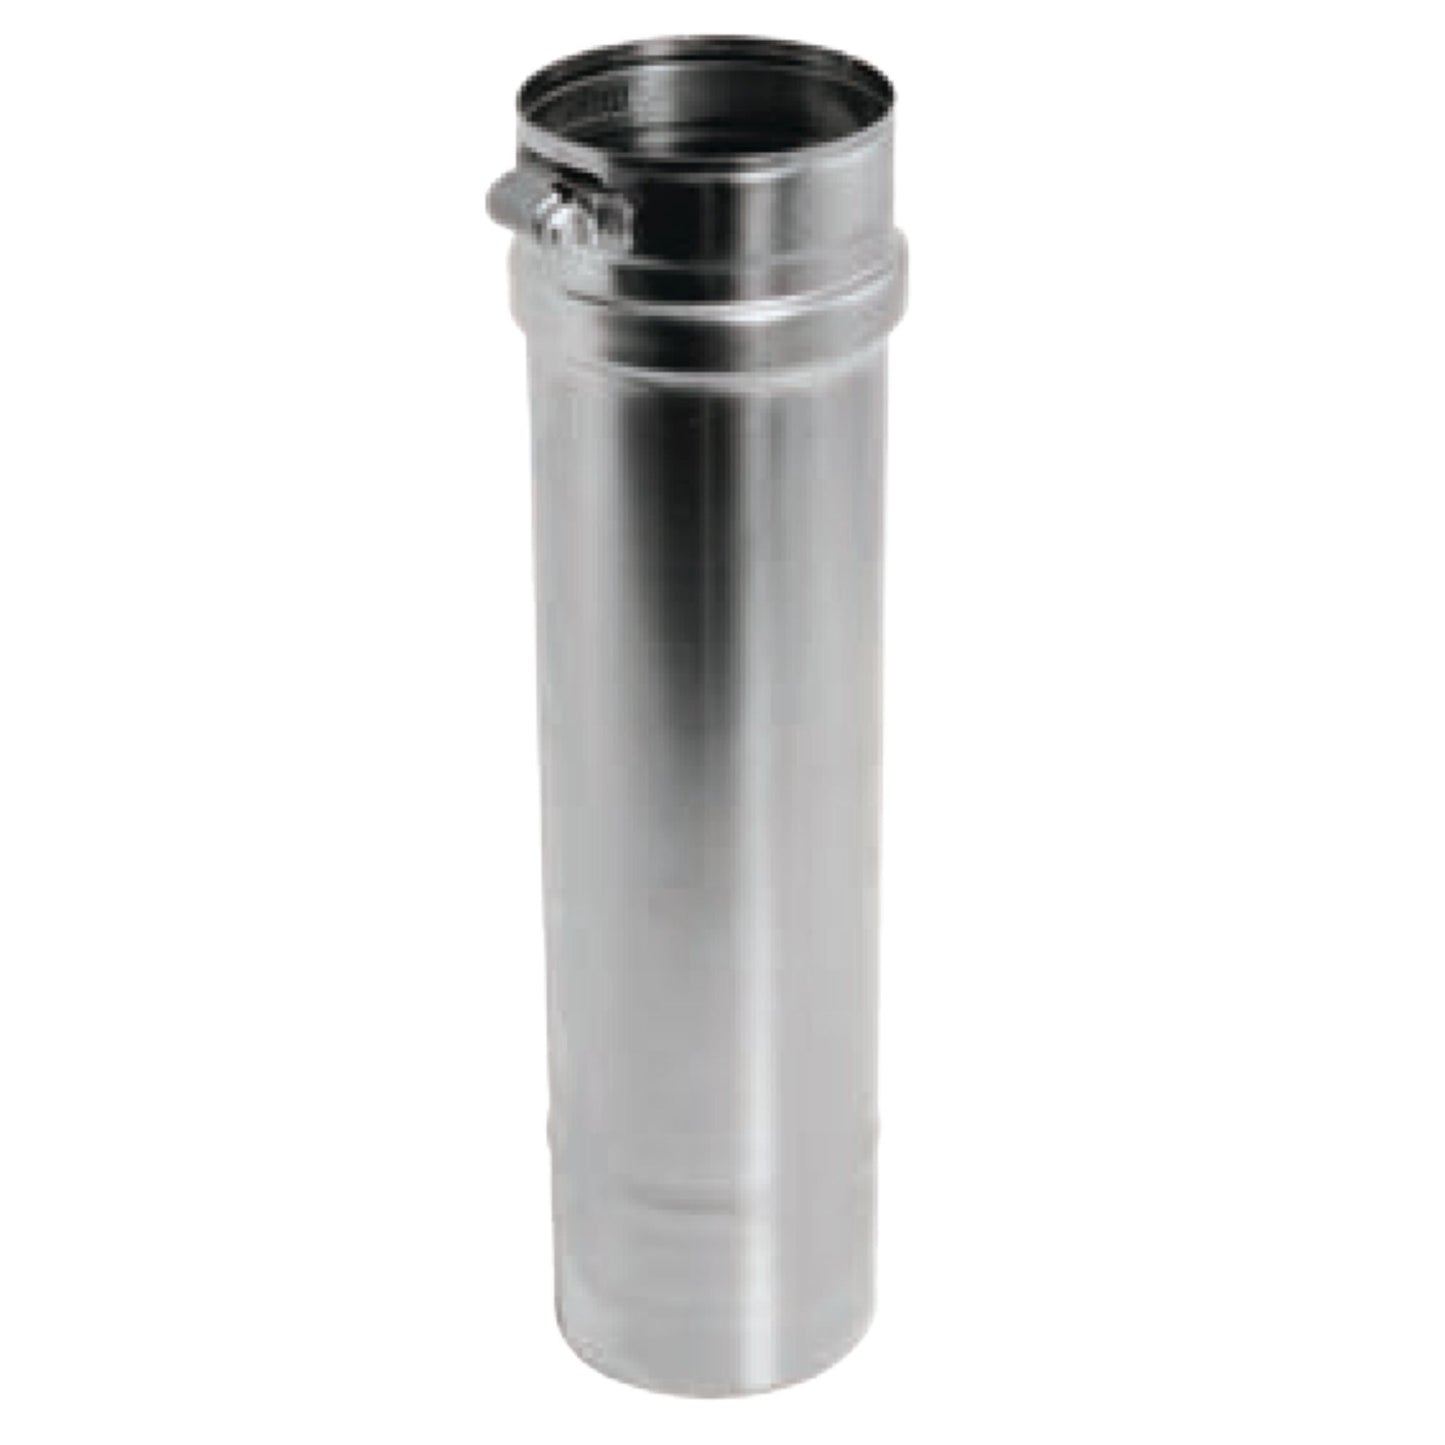 DuraVent FasNSeal 8" x 24" 29-4C Stainless Steel Vent Length